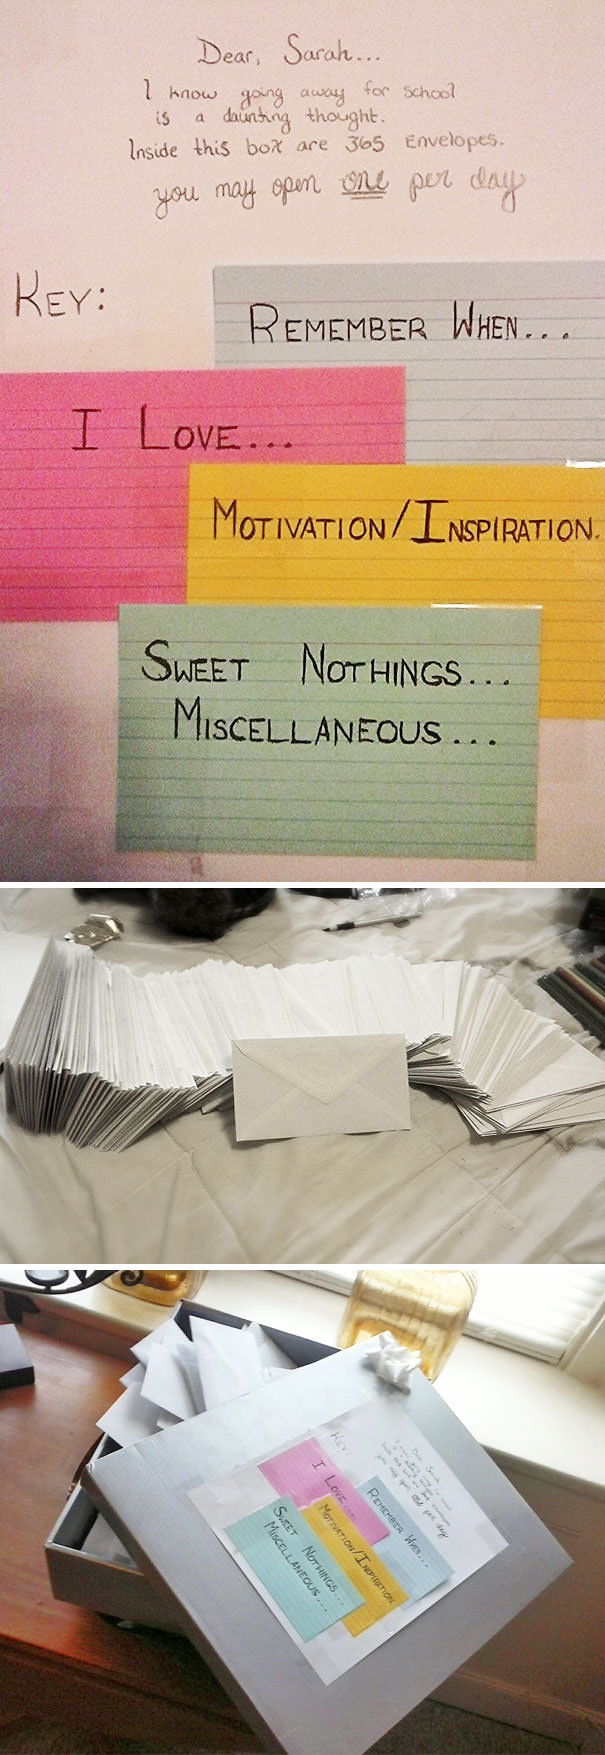 My girlfriend is leaving home for school and is in a bit of emotional turmoil over it. I wrote her 365 personalized love letters sealed in individual envelopes for her to read each day while she's away.